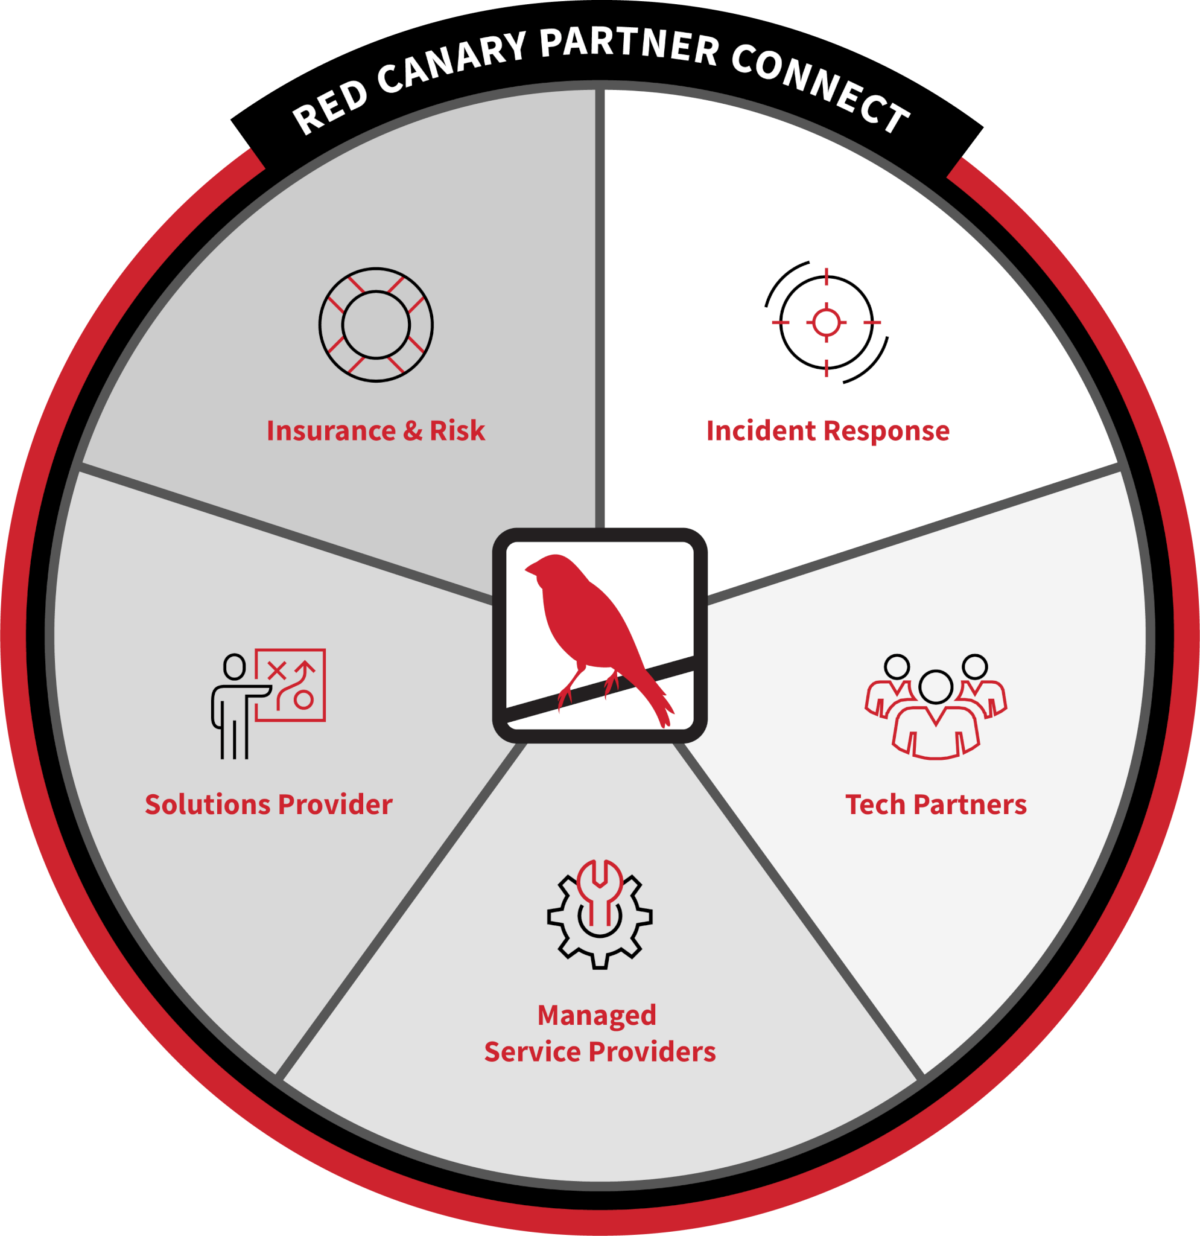 Through Red Canary Partner Connect, we partner with Incident Response providers, Tech Partners, Managed Service Providers, Solutions Providers and Insurance & Risk